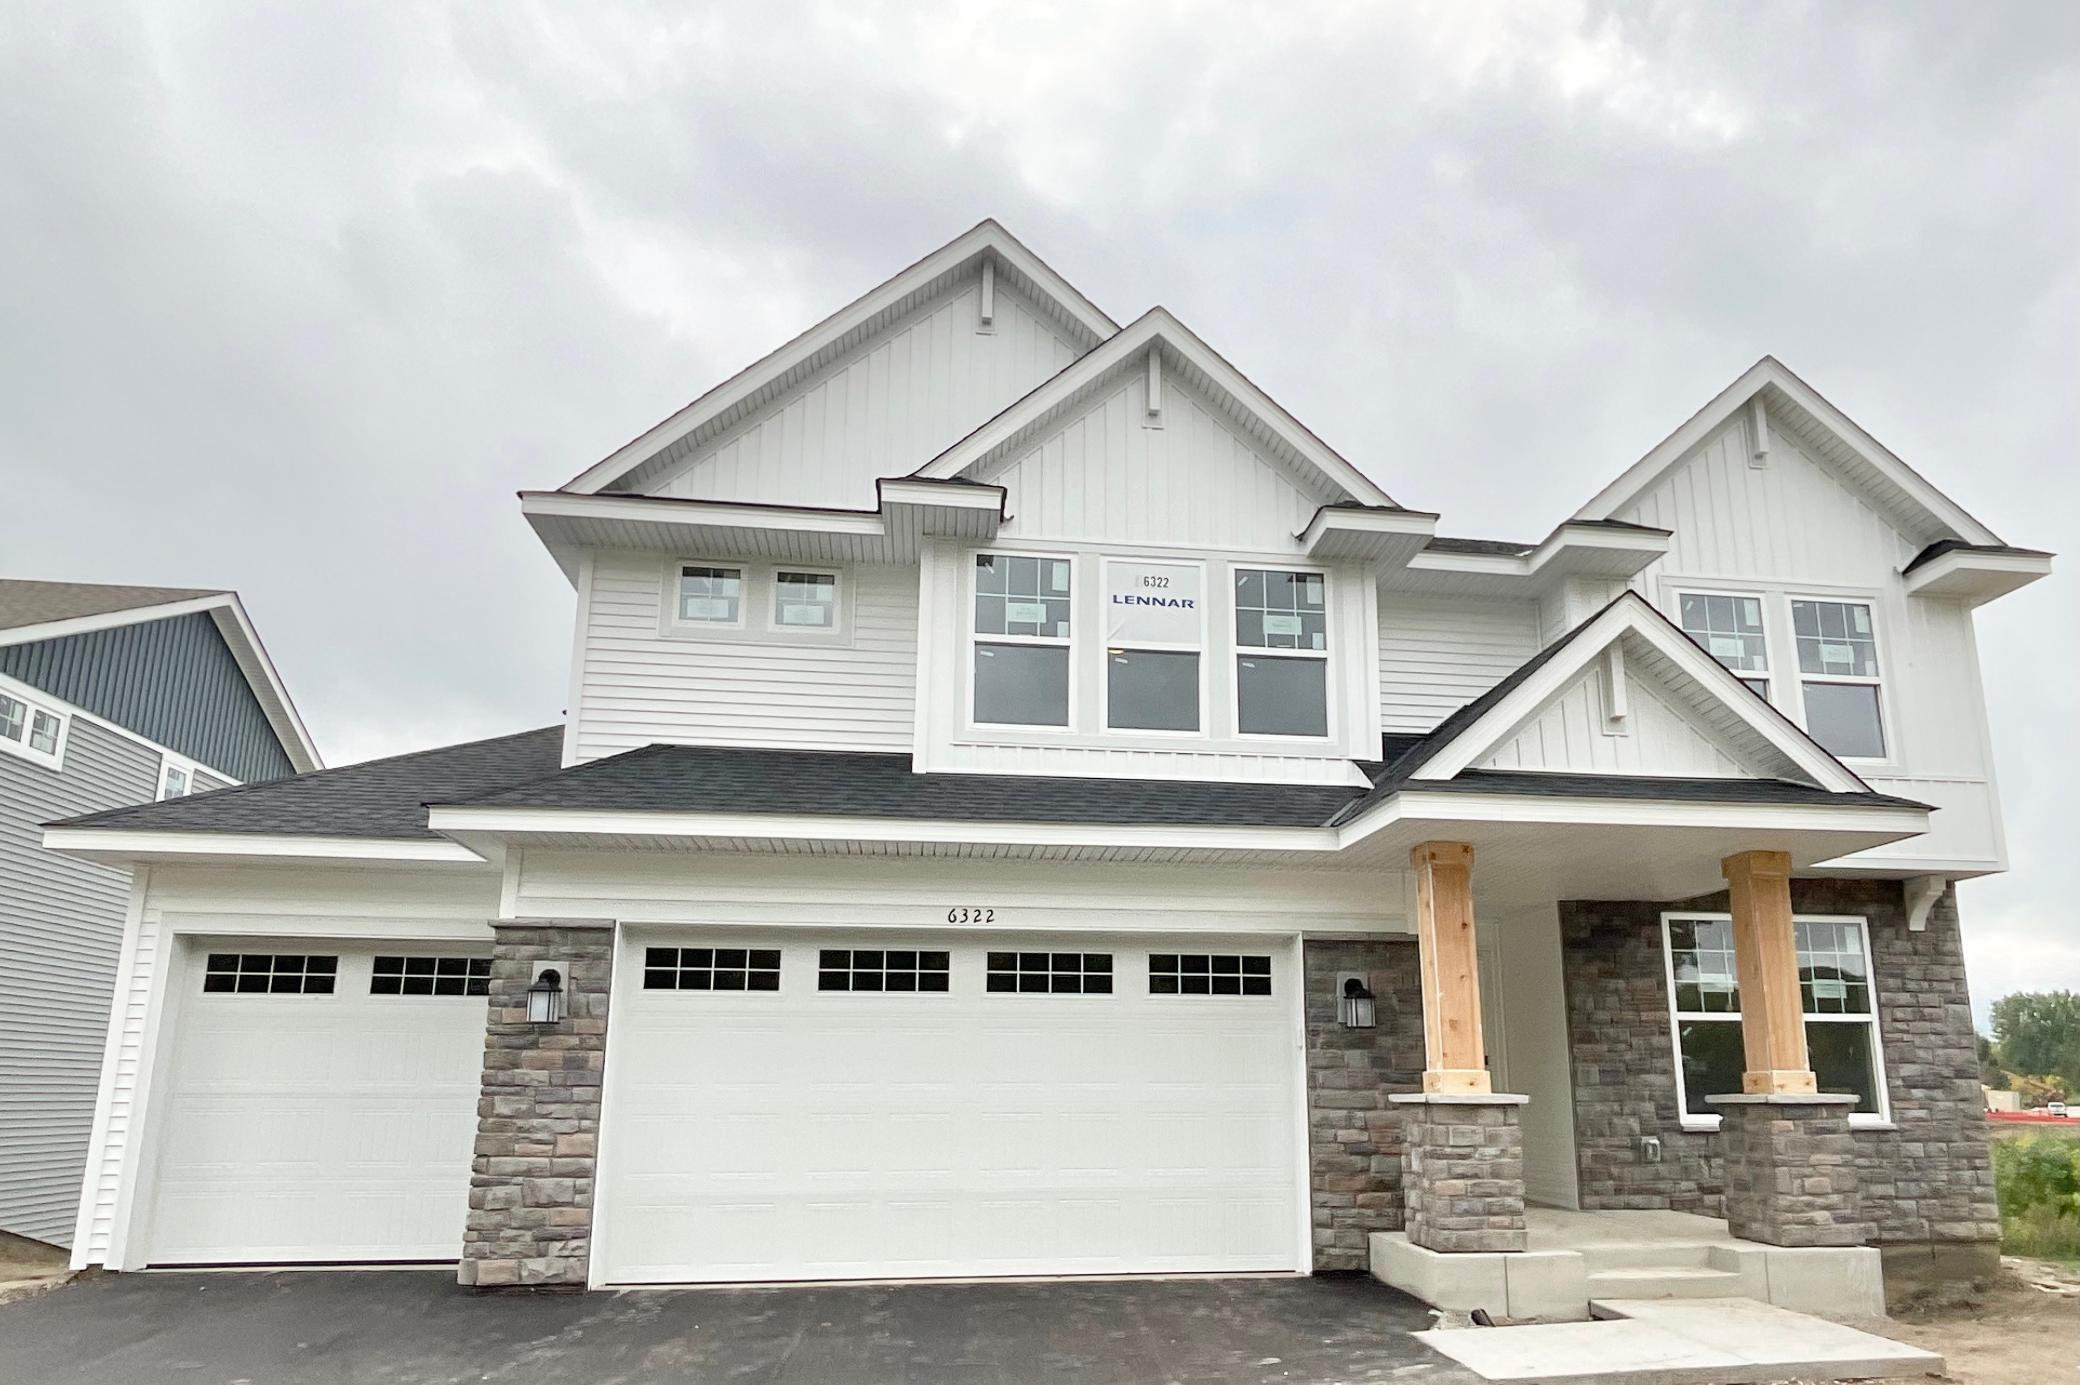 The Washburn is one of Lennar’s most popular plans offering over 4400 finished square feet with a completed basement. There are 5 bedrooms and 5 bathrooms. The home is in progress with completion estimated end of October.